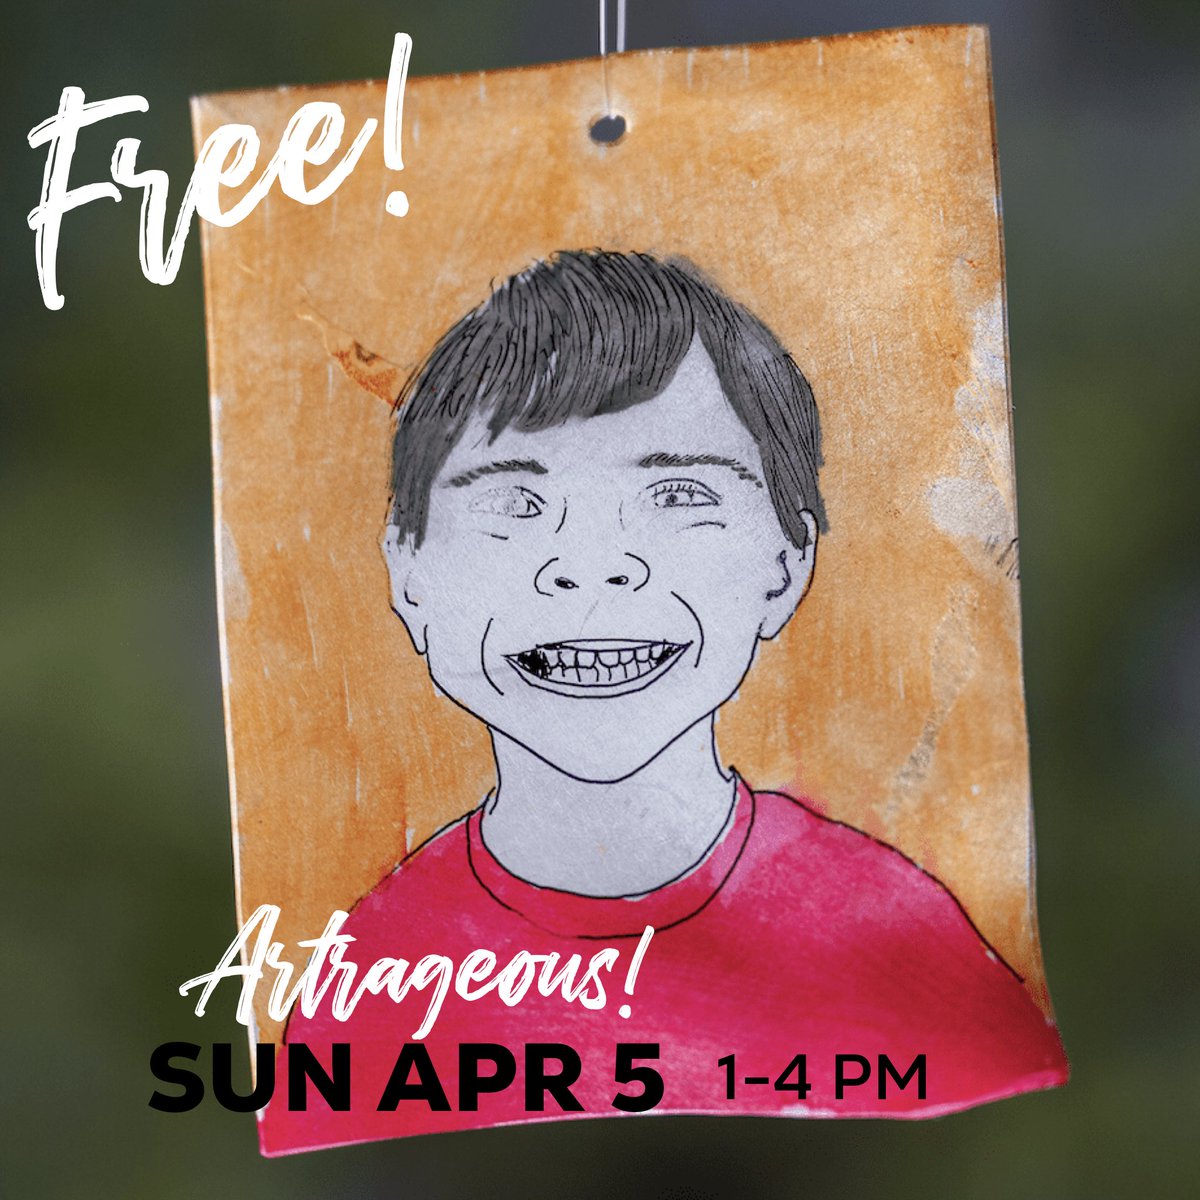 Sunday Funday at the Morris!

Artrageous! Family Sunday: Create a Shrinky Dink Self- Portraits • May 5, 2- 4 pm. Draw + color a self-portrait, then watch the mini-me masterpieces shrink into cool, wearable charms. 🆓 

#selfportrait #kidscrafts #artmuseum #free #loveaugusta